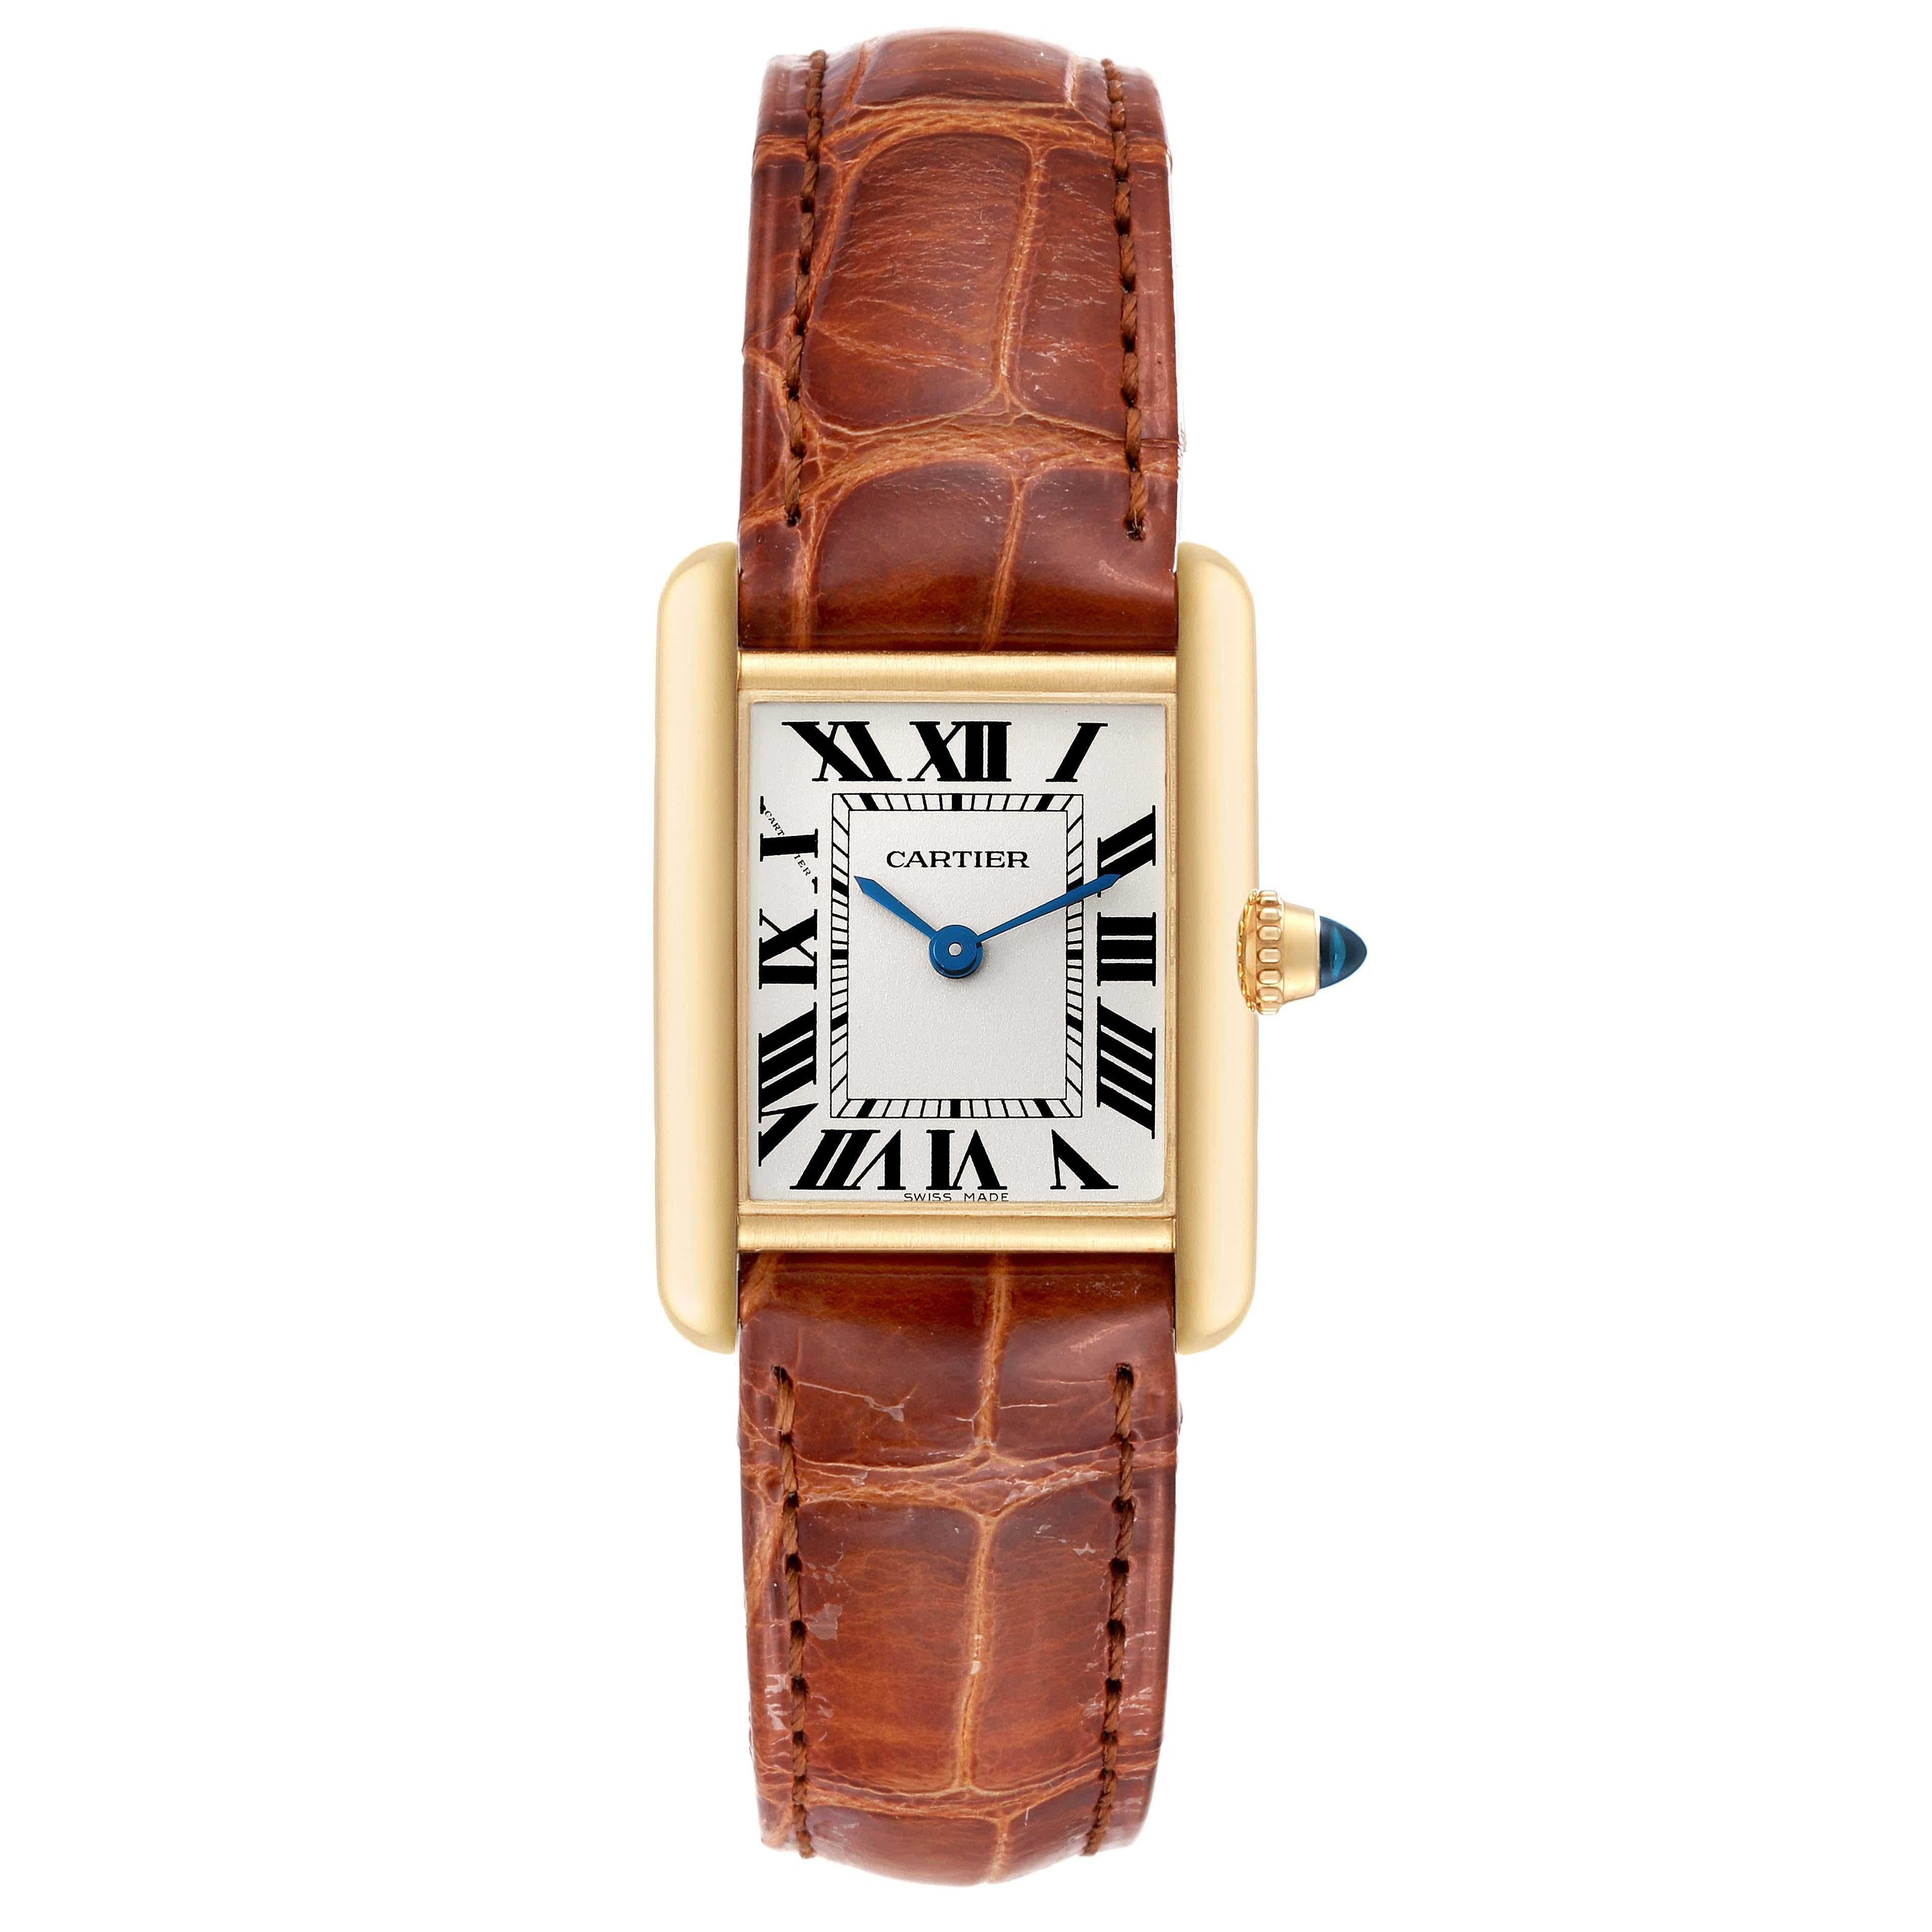 Cartier Tank Louis Small Yellow Gold Brown Strap Ladies Watch W1529856 Box Card. Quartz movement. 18k yellow gold case 29.0 x 22.0 mm. Circular grained crown set with a blue sapphire cabochon. . Scratch resistant sapphire crystal. Silvered grained